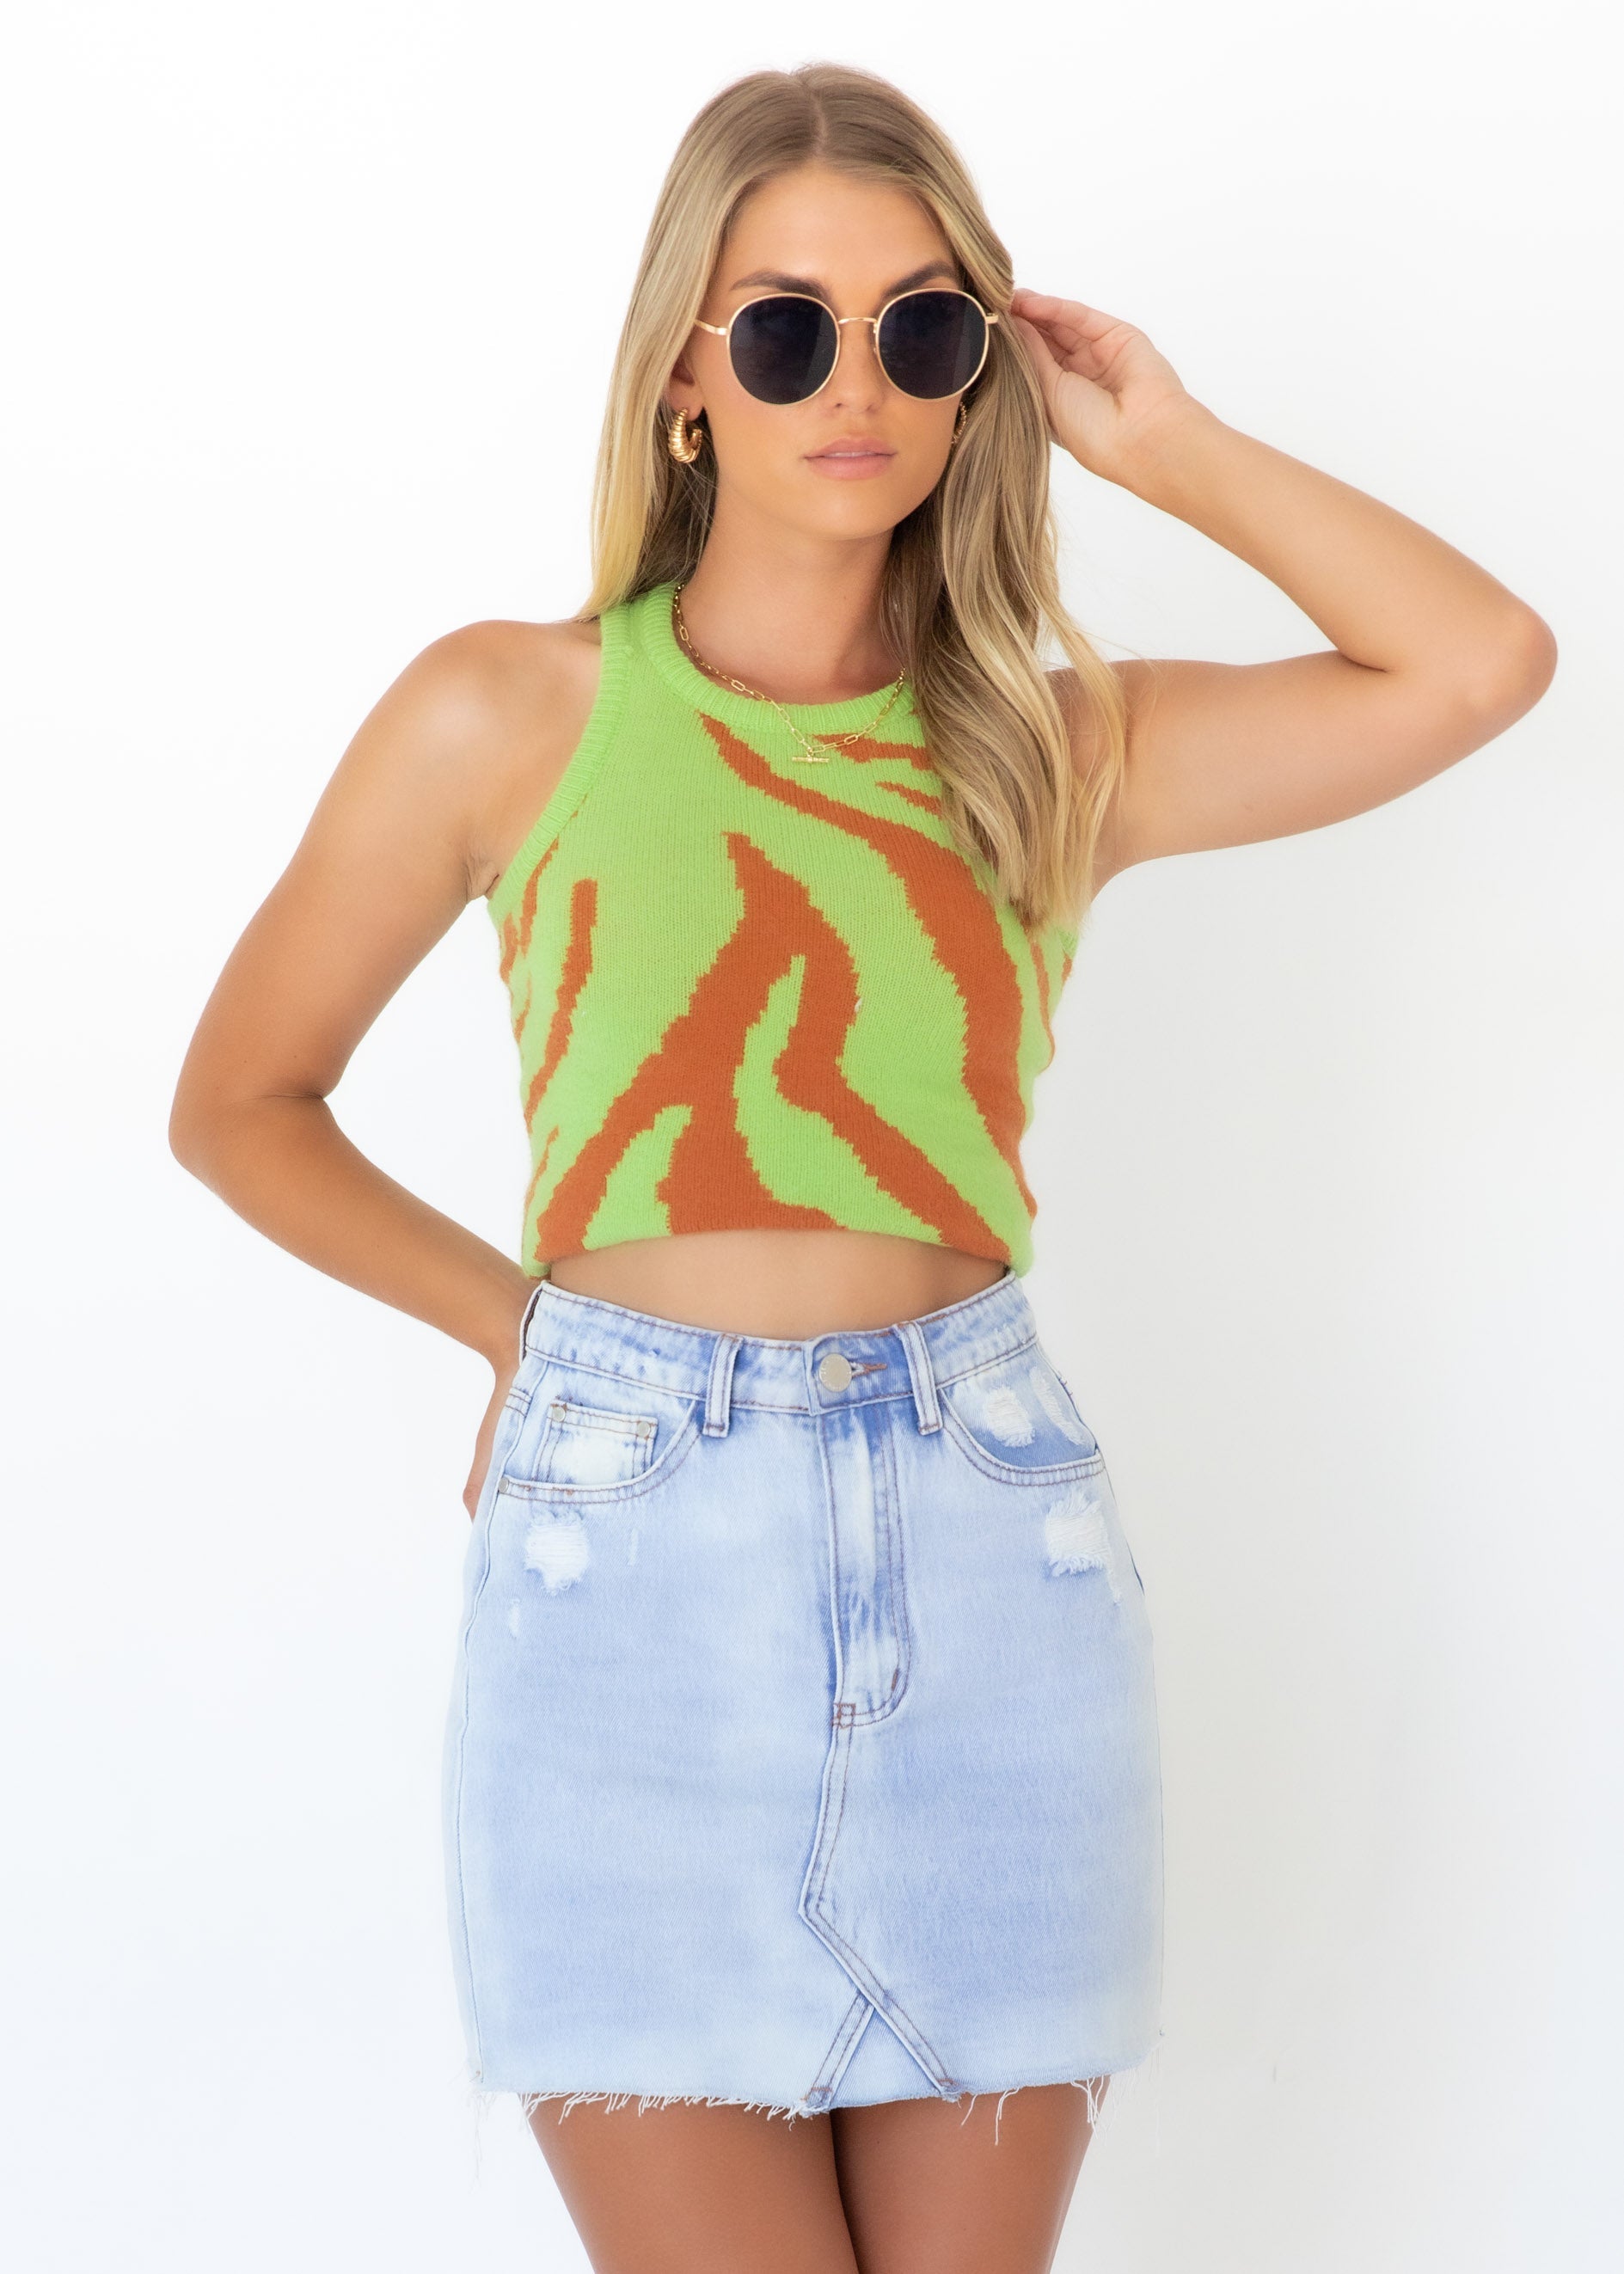 Only Vice Knit Top - Green Zebra